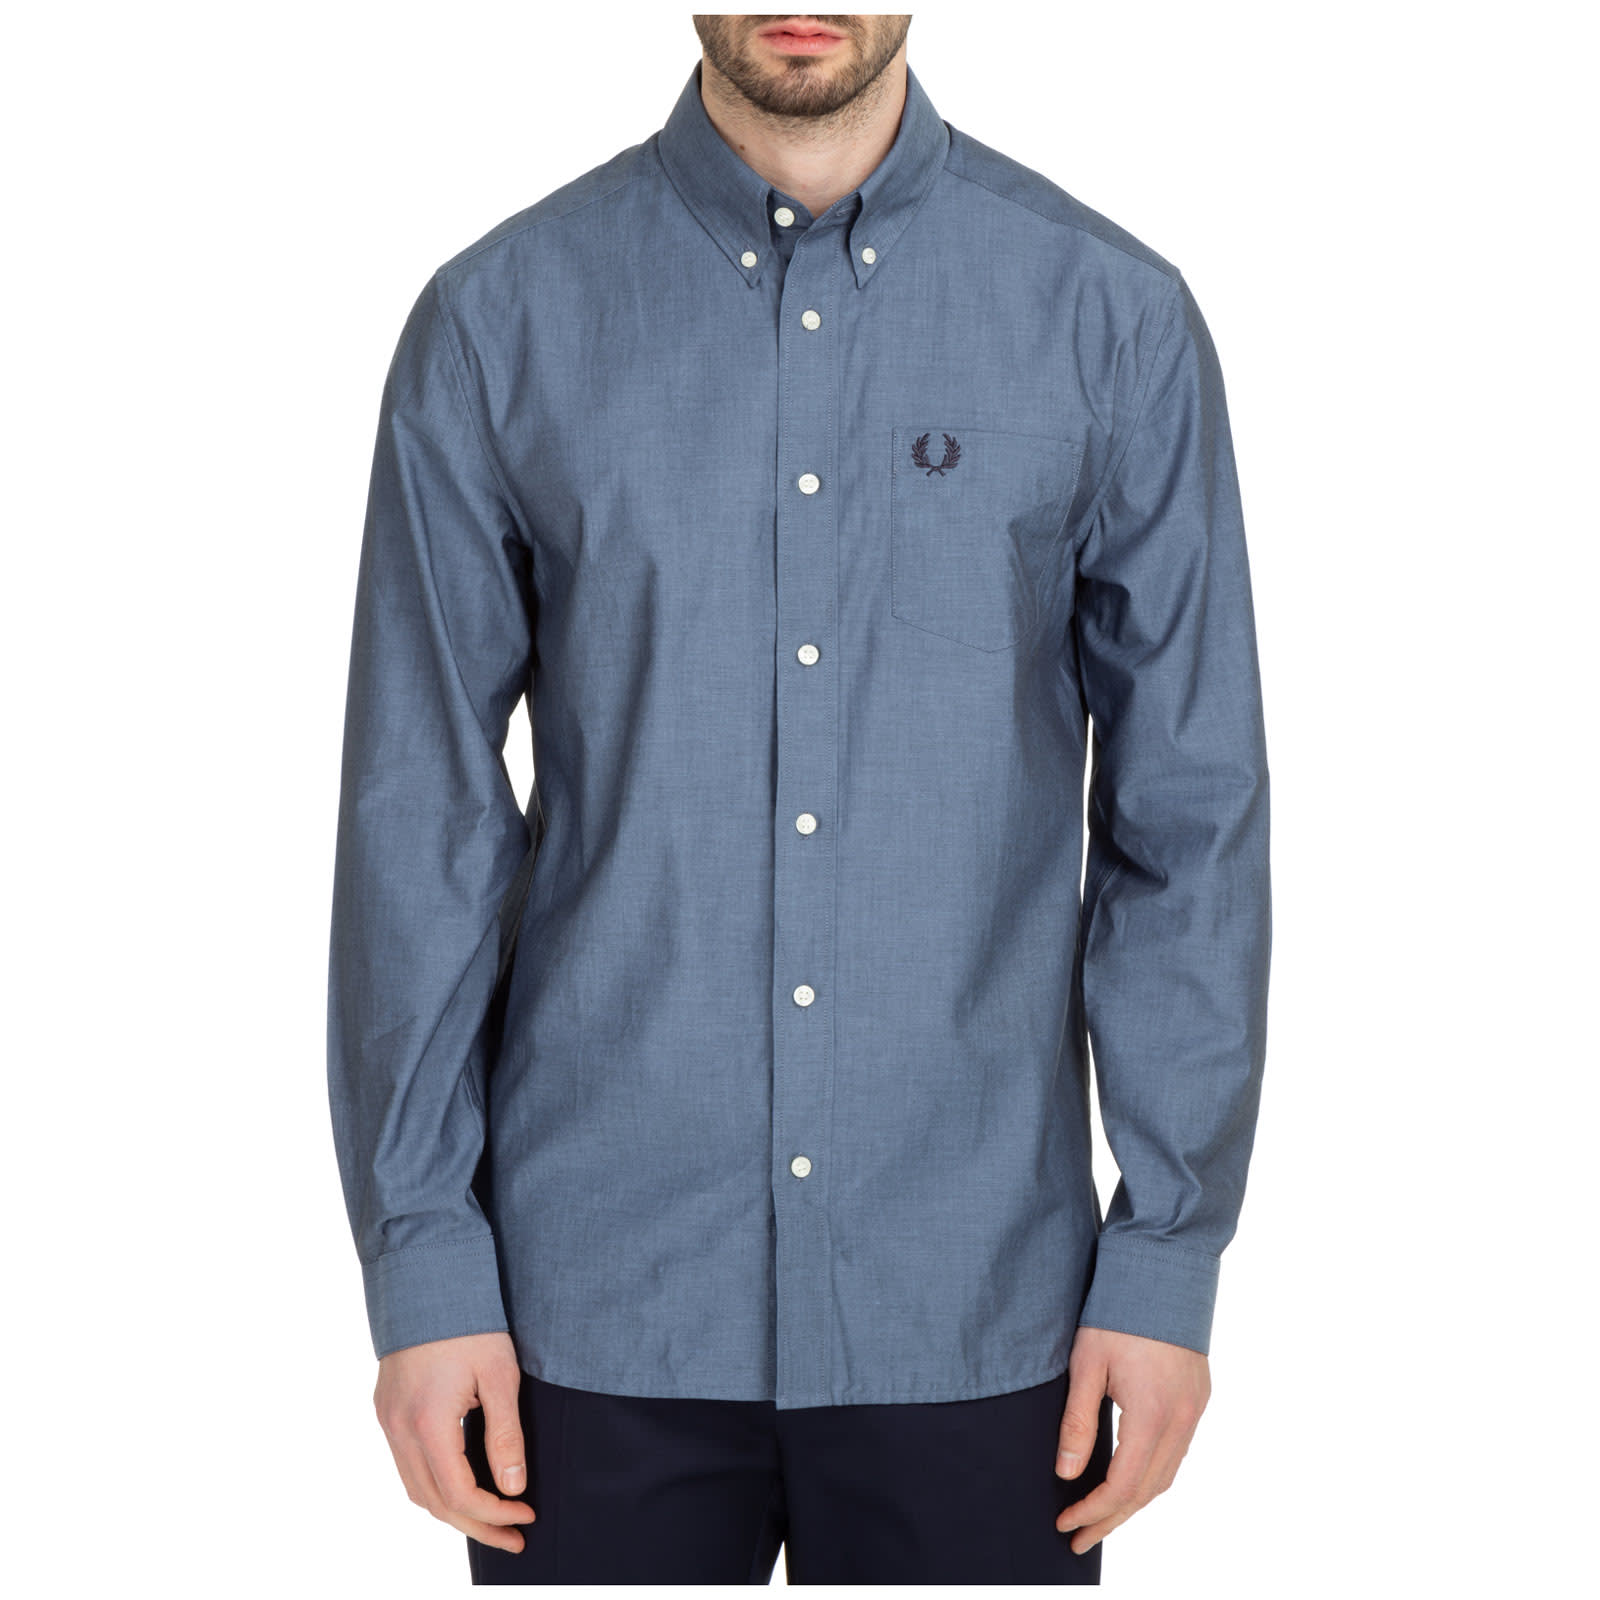 Fred Perry Laurel Wreath Shirt